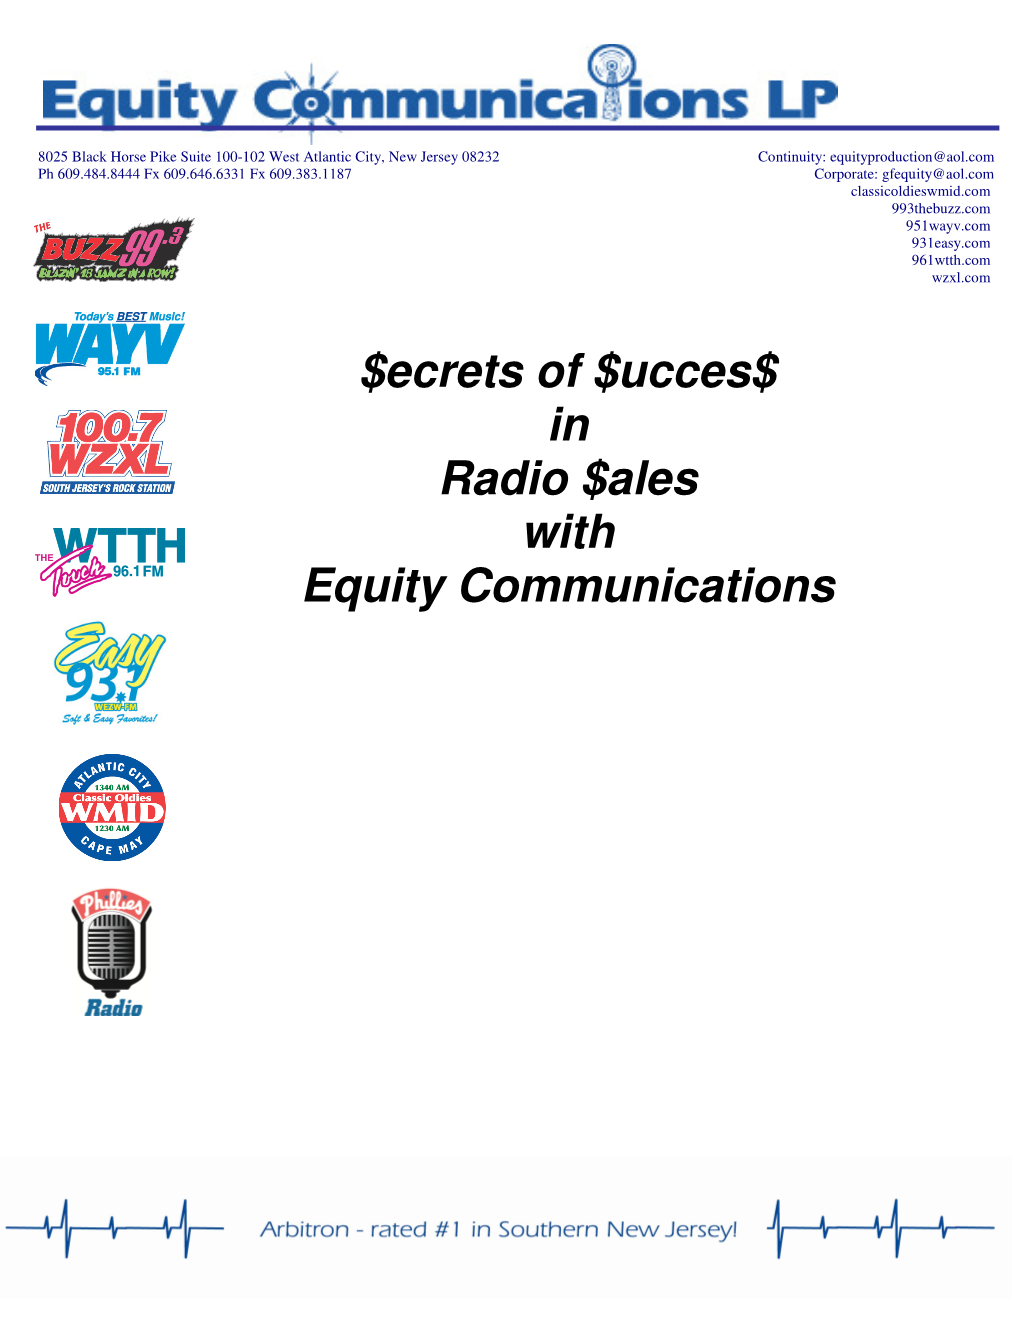 $Ecrets of $Ucces$ in Radio $Ales with Equity Communications